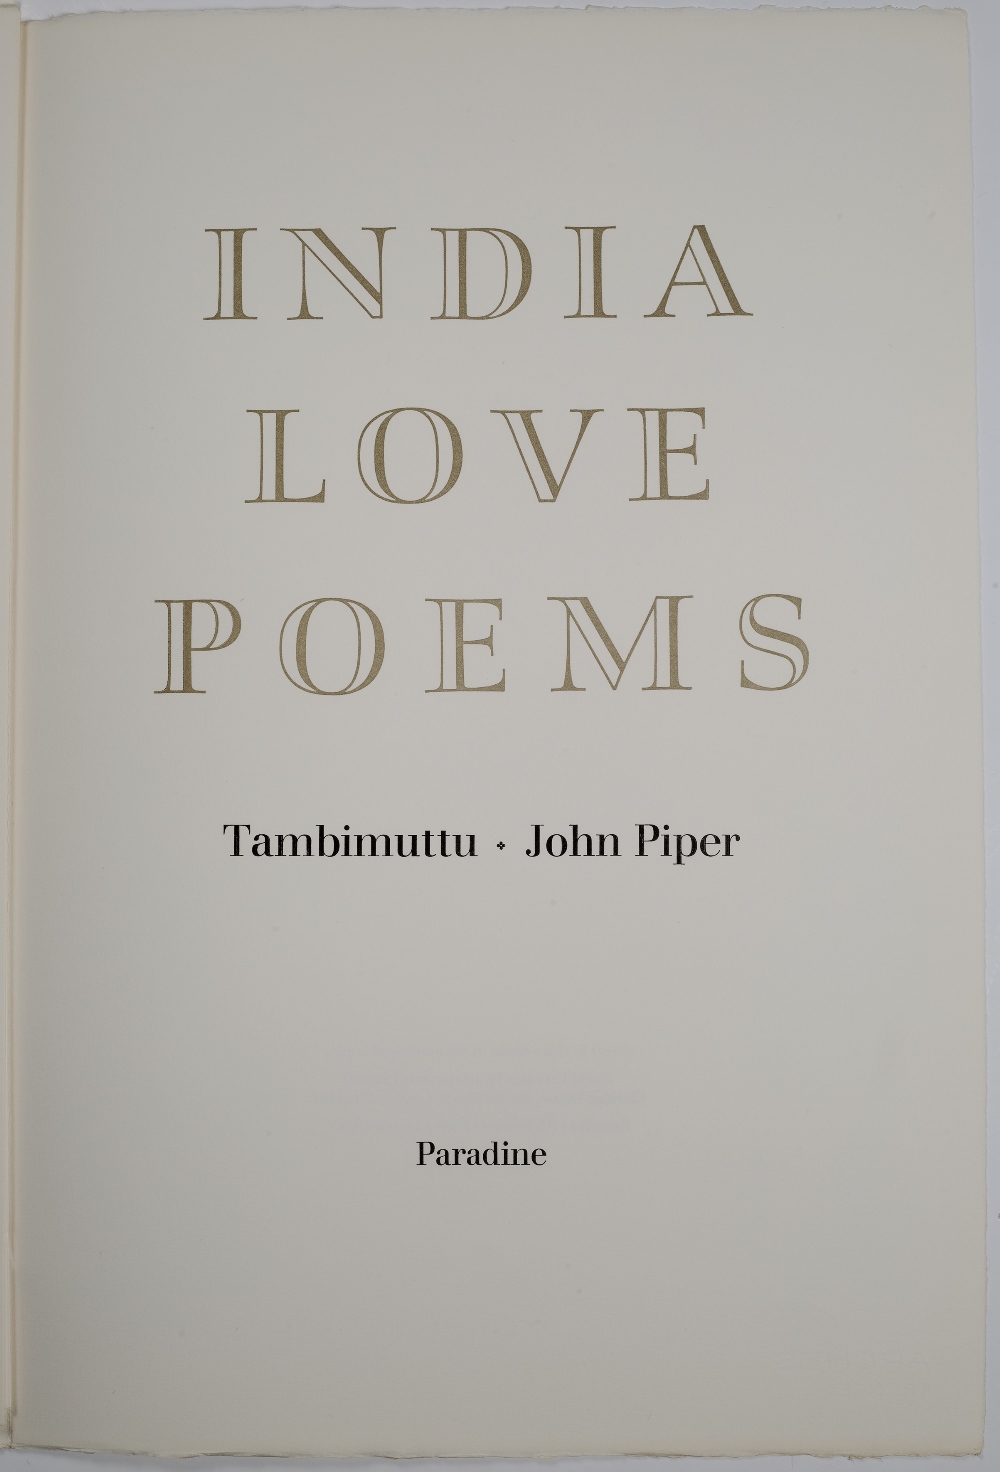 John Piper (1903-1992) India Love Poems signed by the artist and translator Tambimuttu eighteen